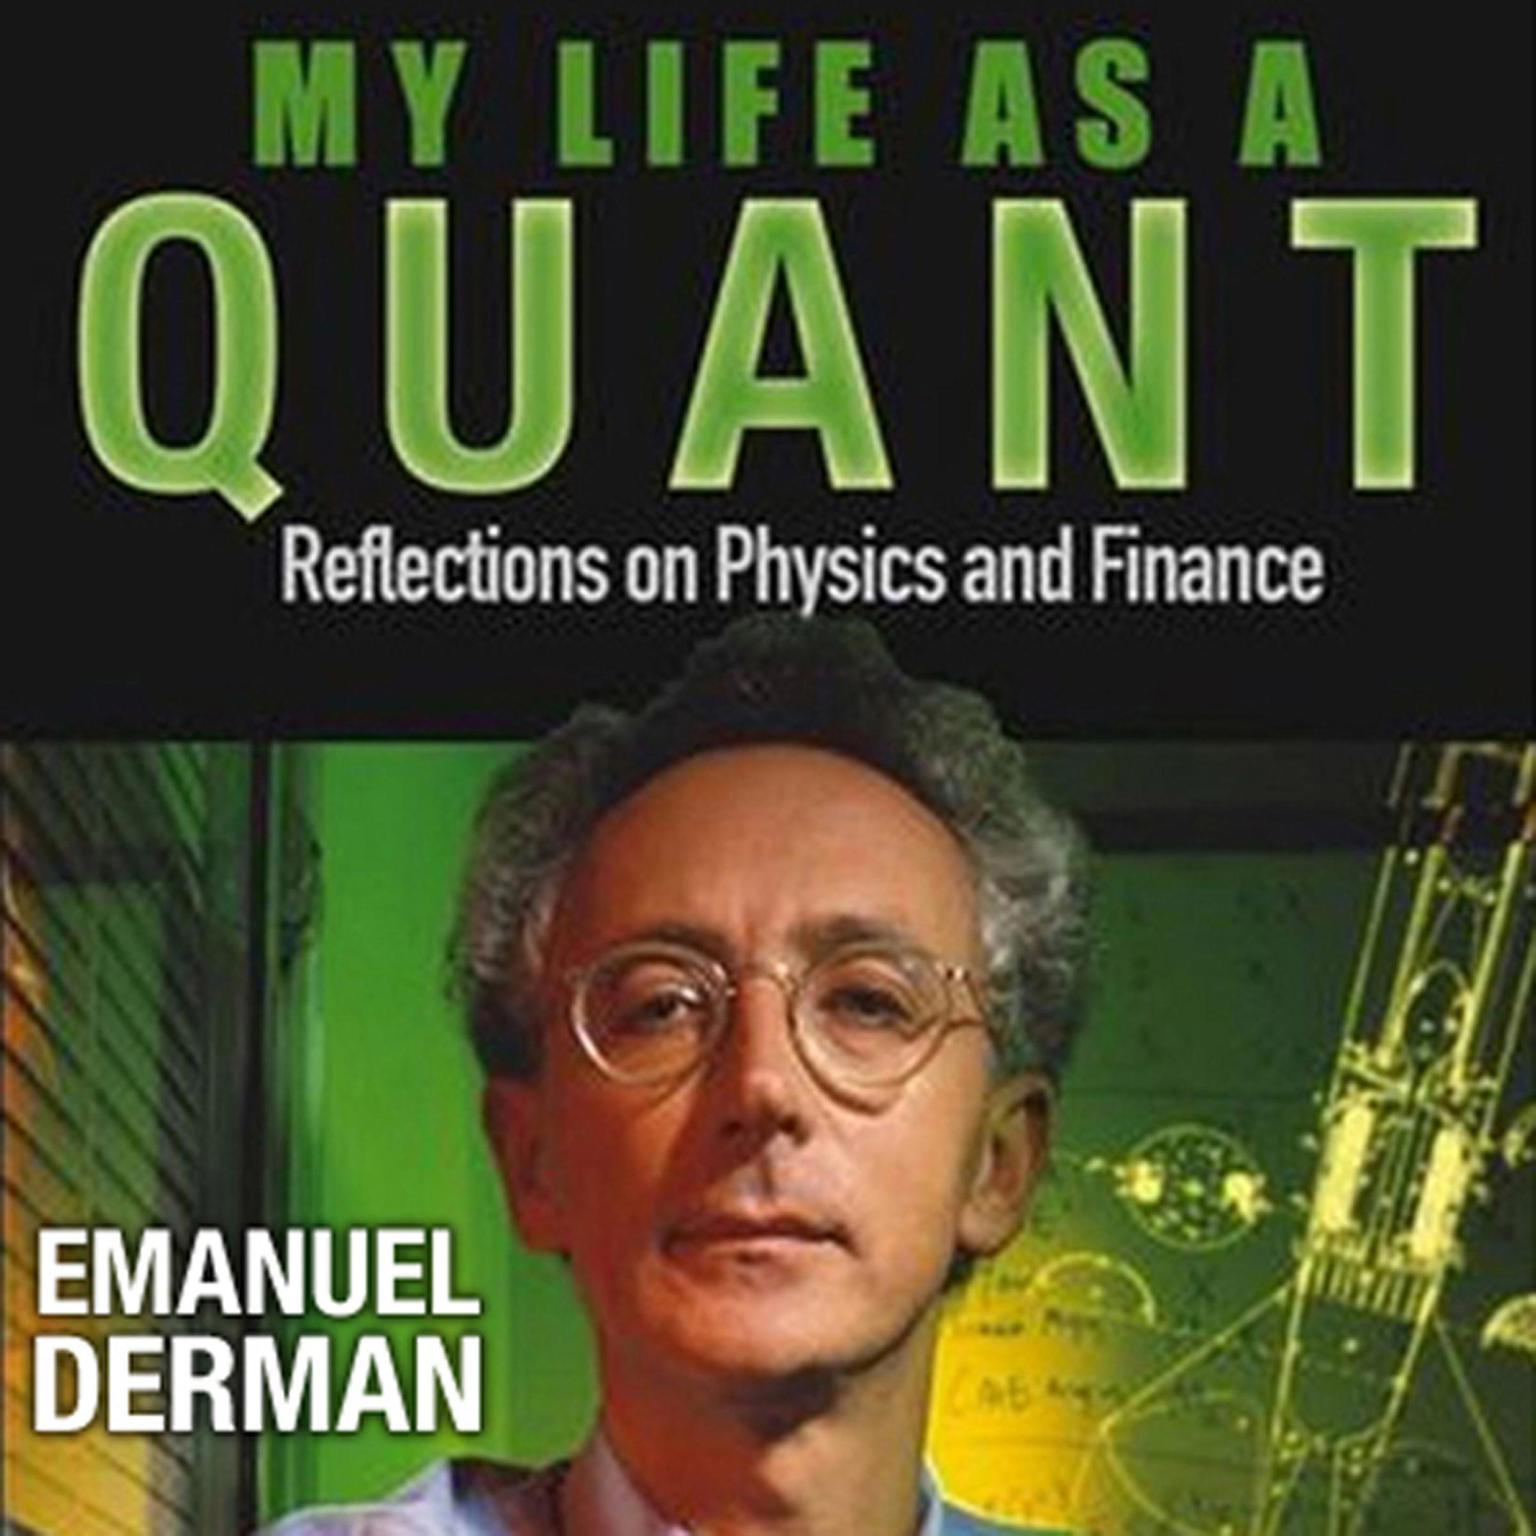 My Life as a Quant: Reflections on Physics and Finance Audiobook, by Emanuel Derman